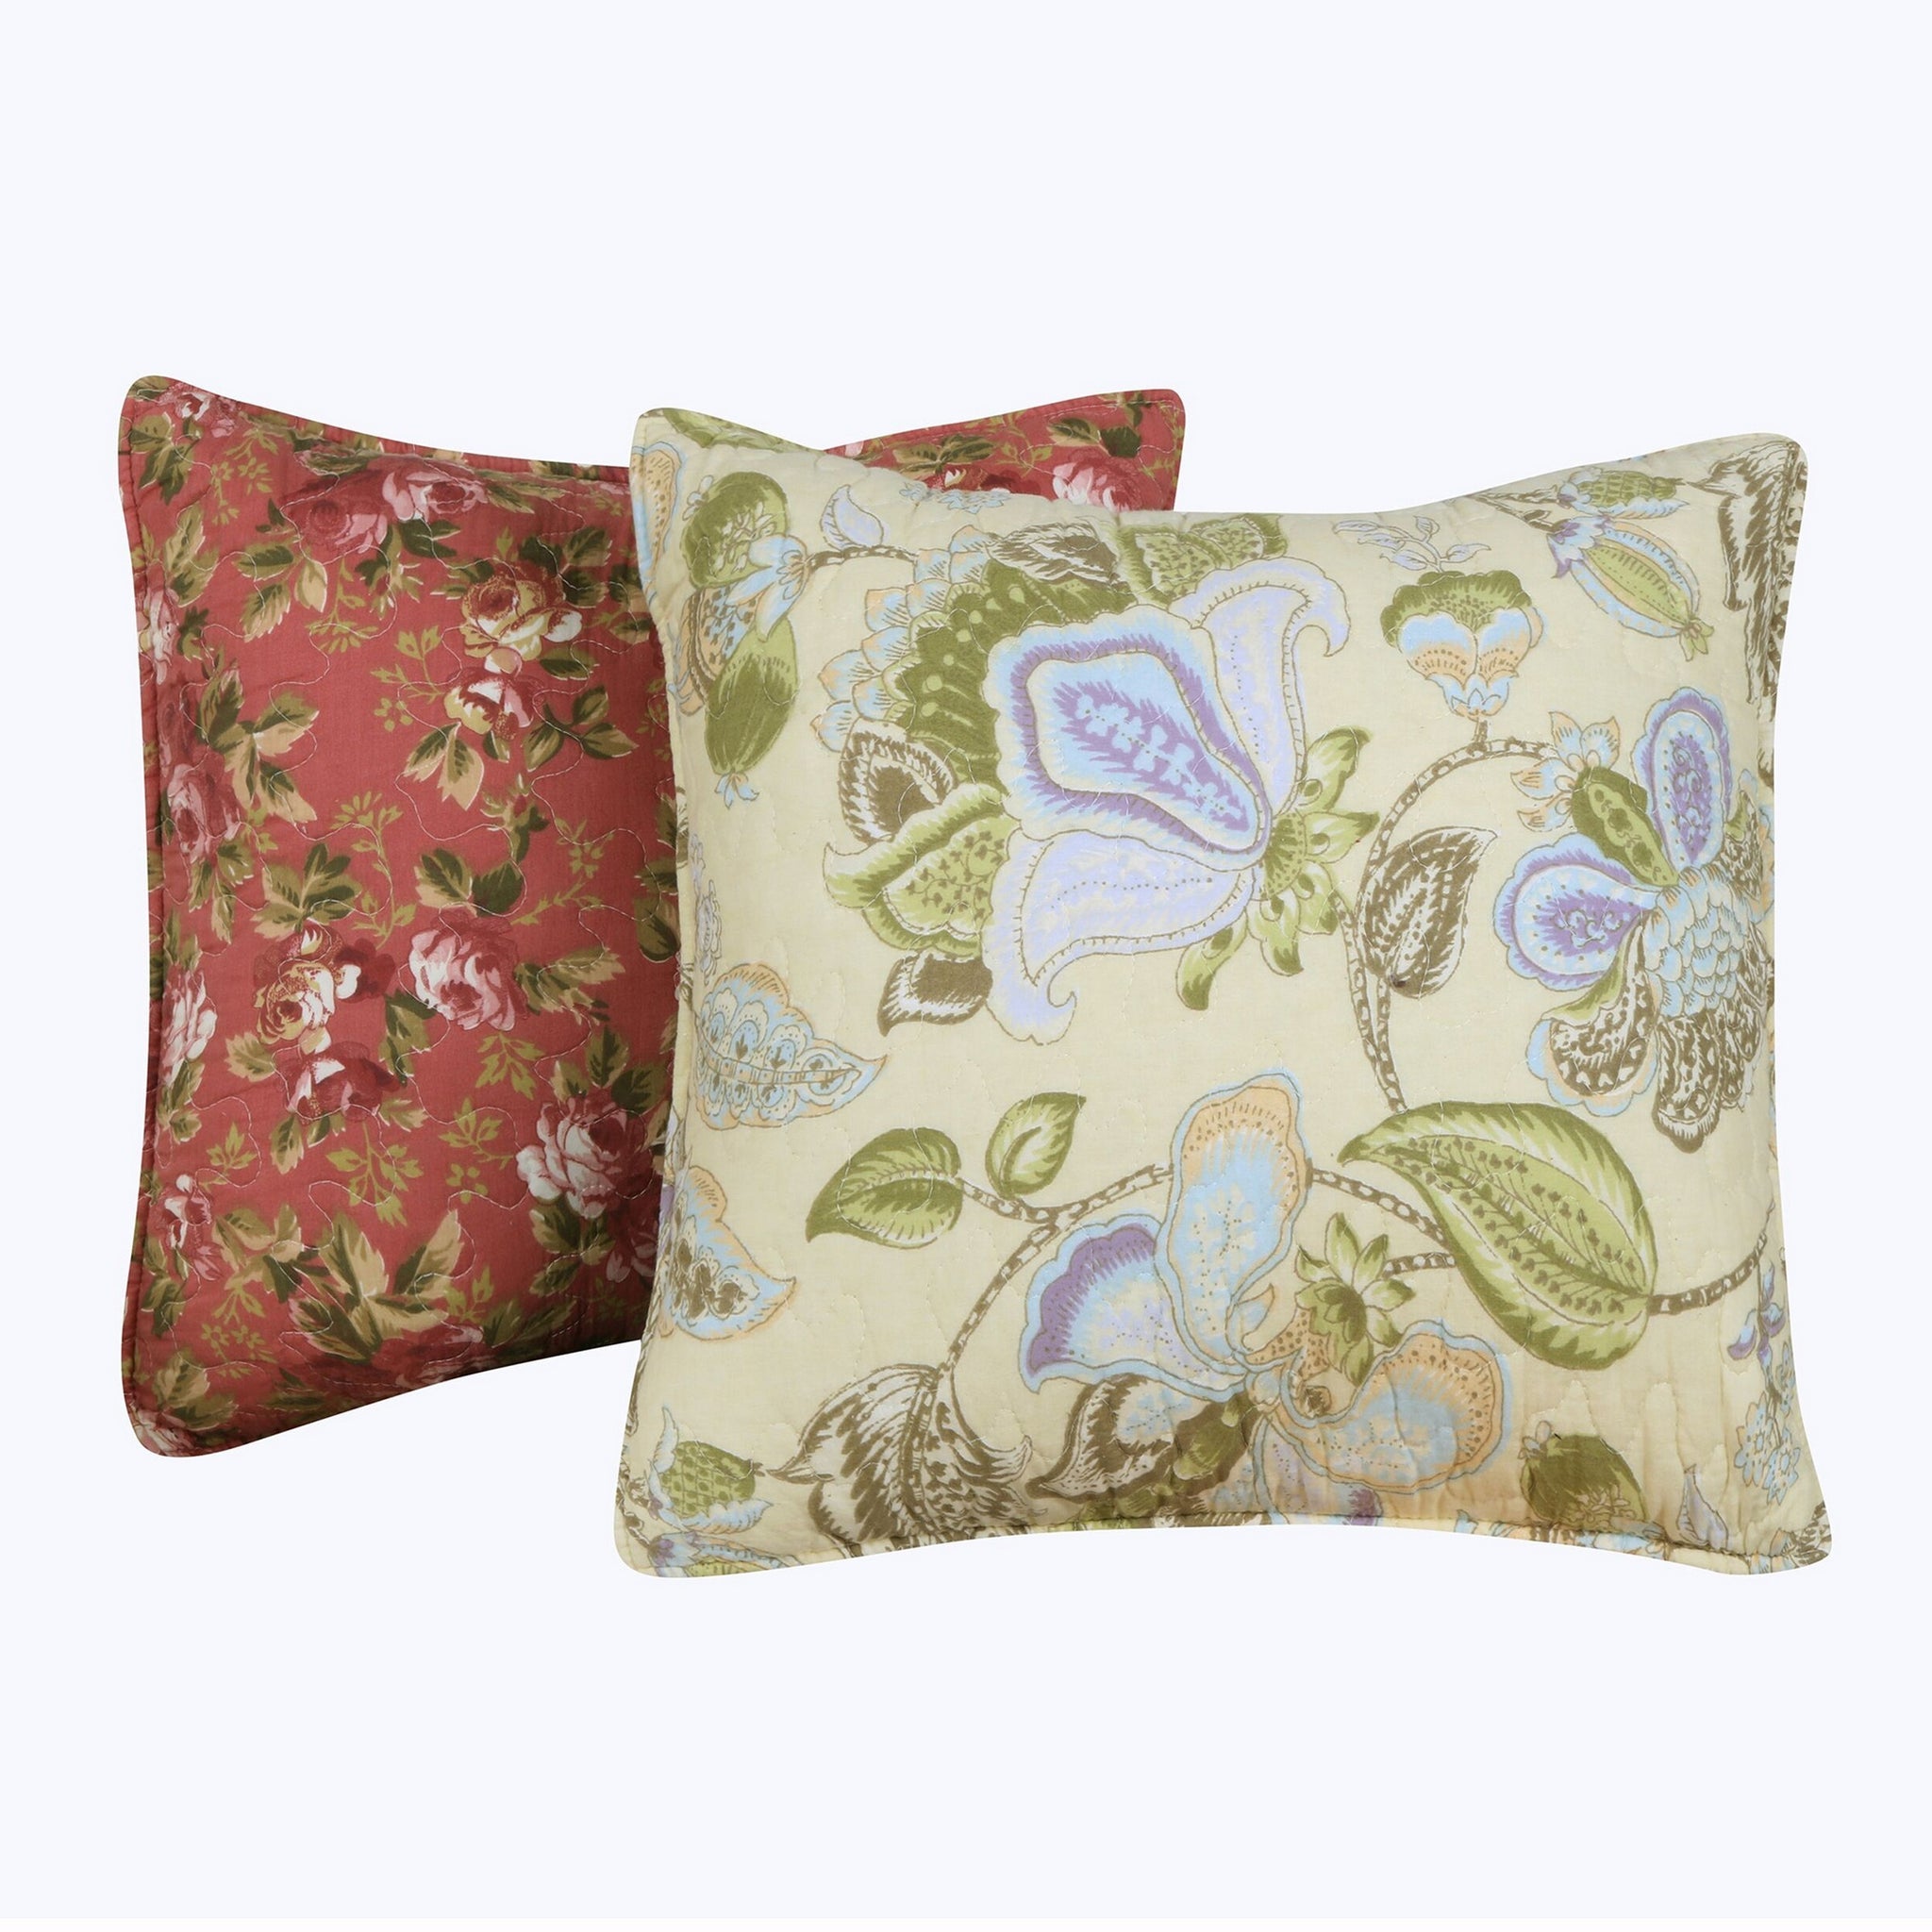 Eiger Fabric Decorative Pillow with Floral